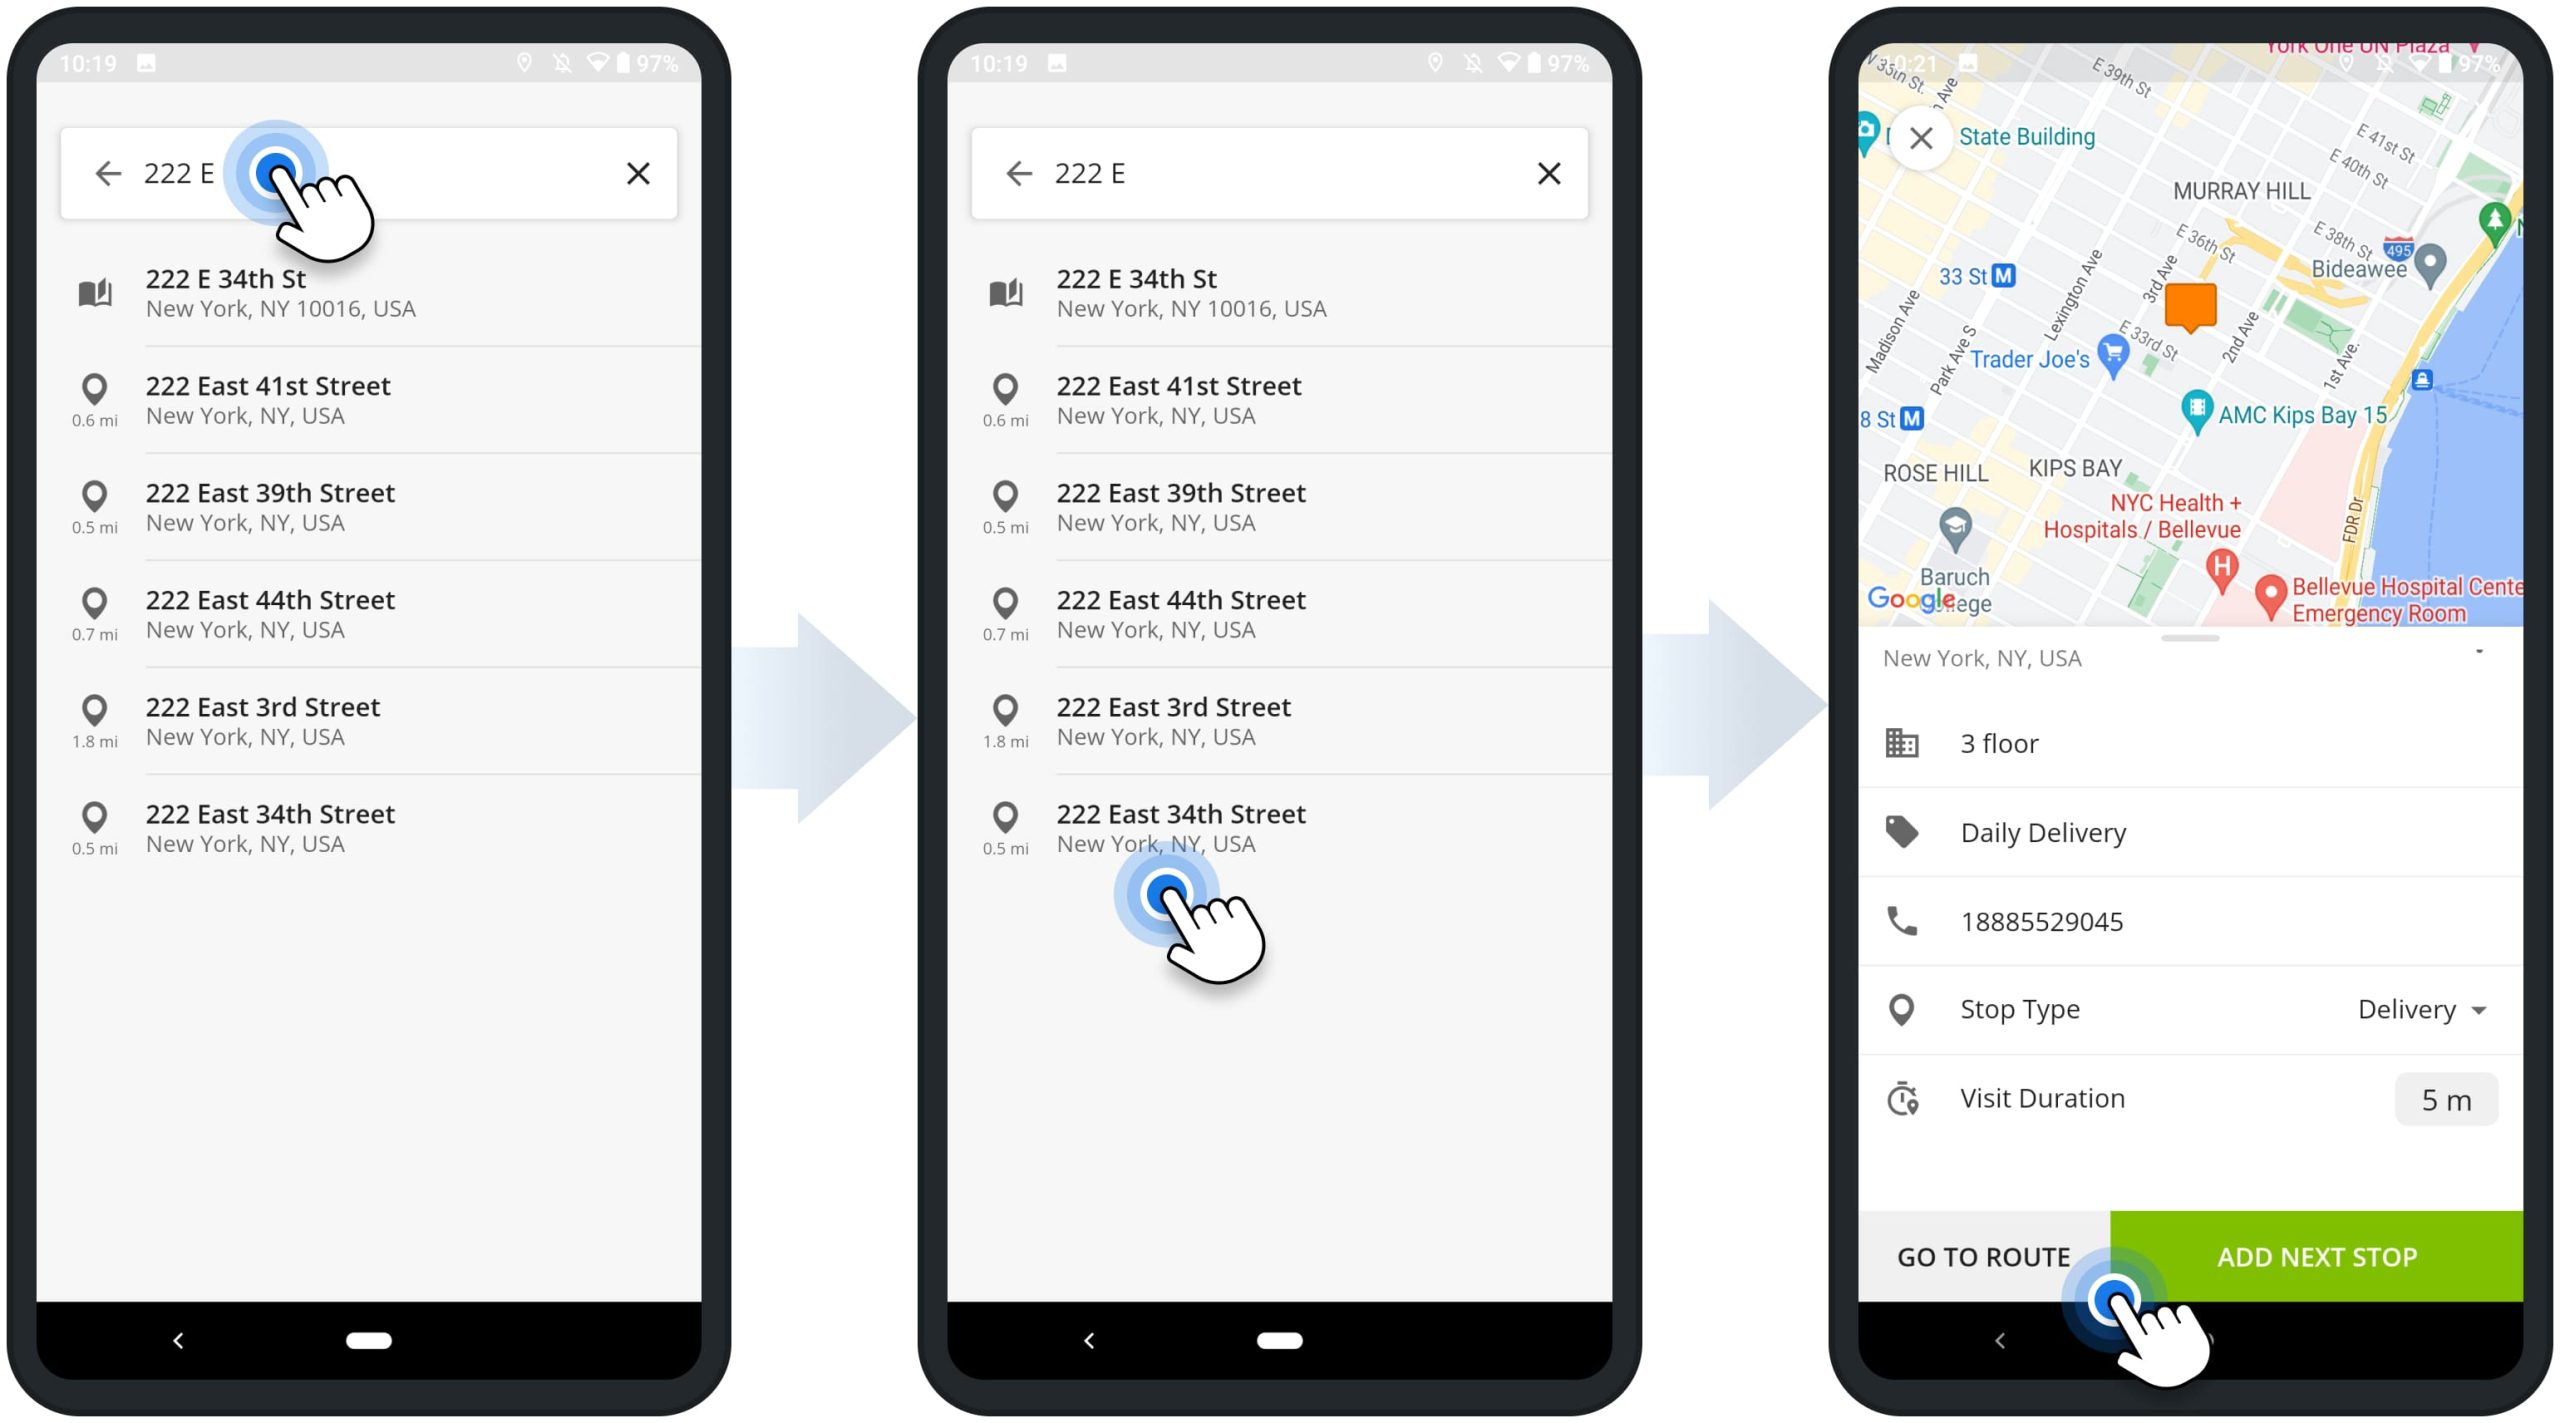 Add route addresses with auto-complete, location validation, and geocoding on Route4Me's Android Multi-Stop Route Planning App.